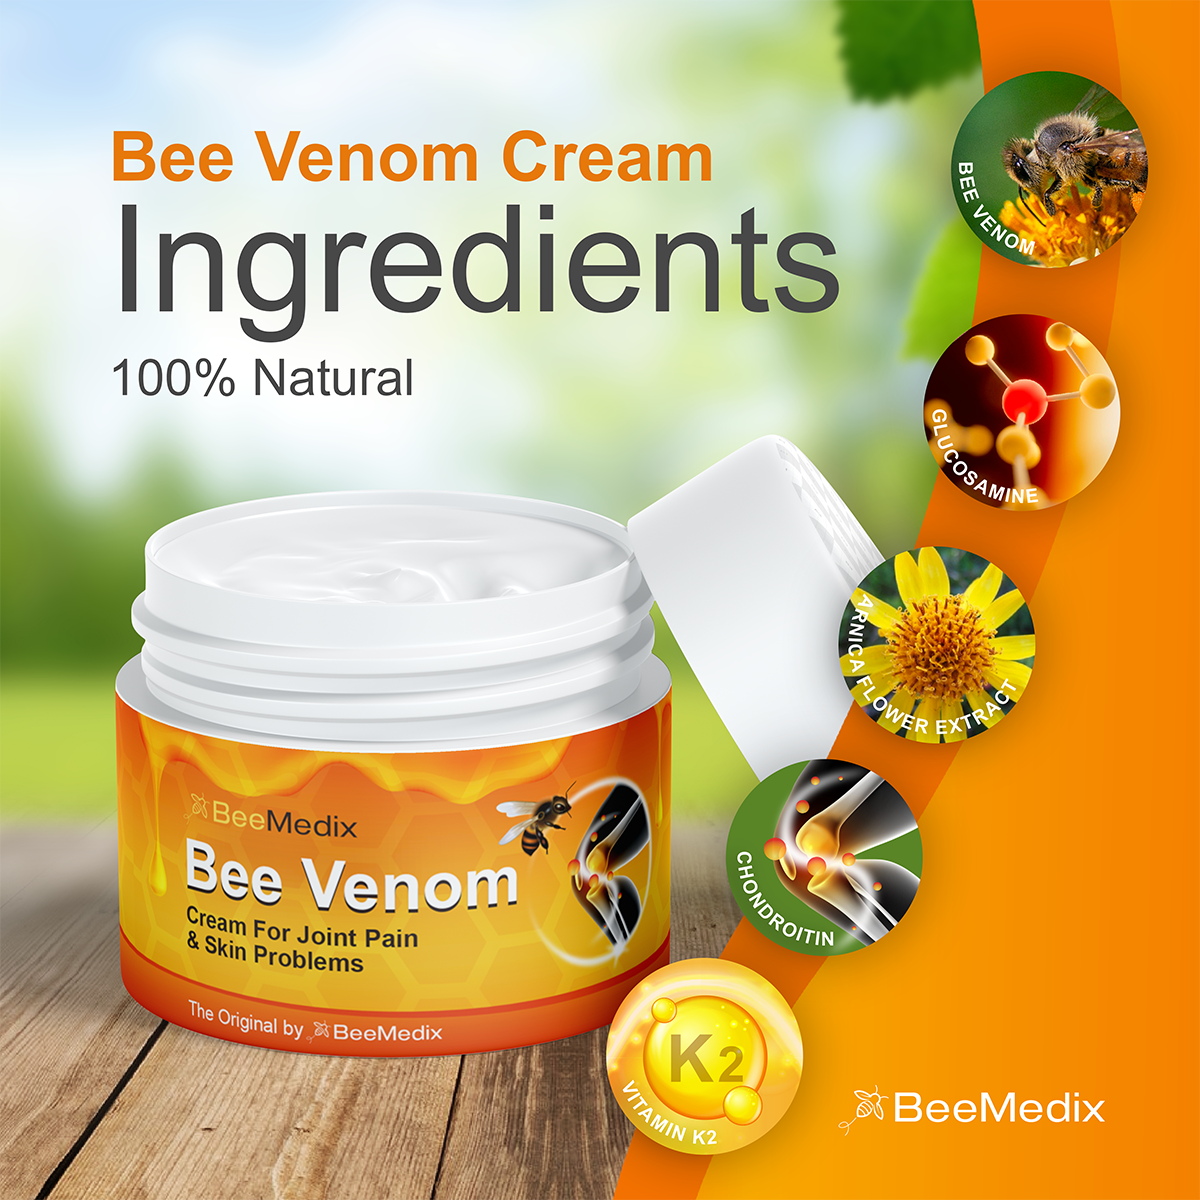 BeeMedix Bee Venom Cream For Joint Pain And Skin Problems (3.7 fl. oz.)